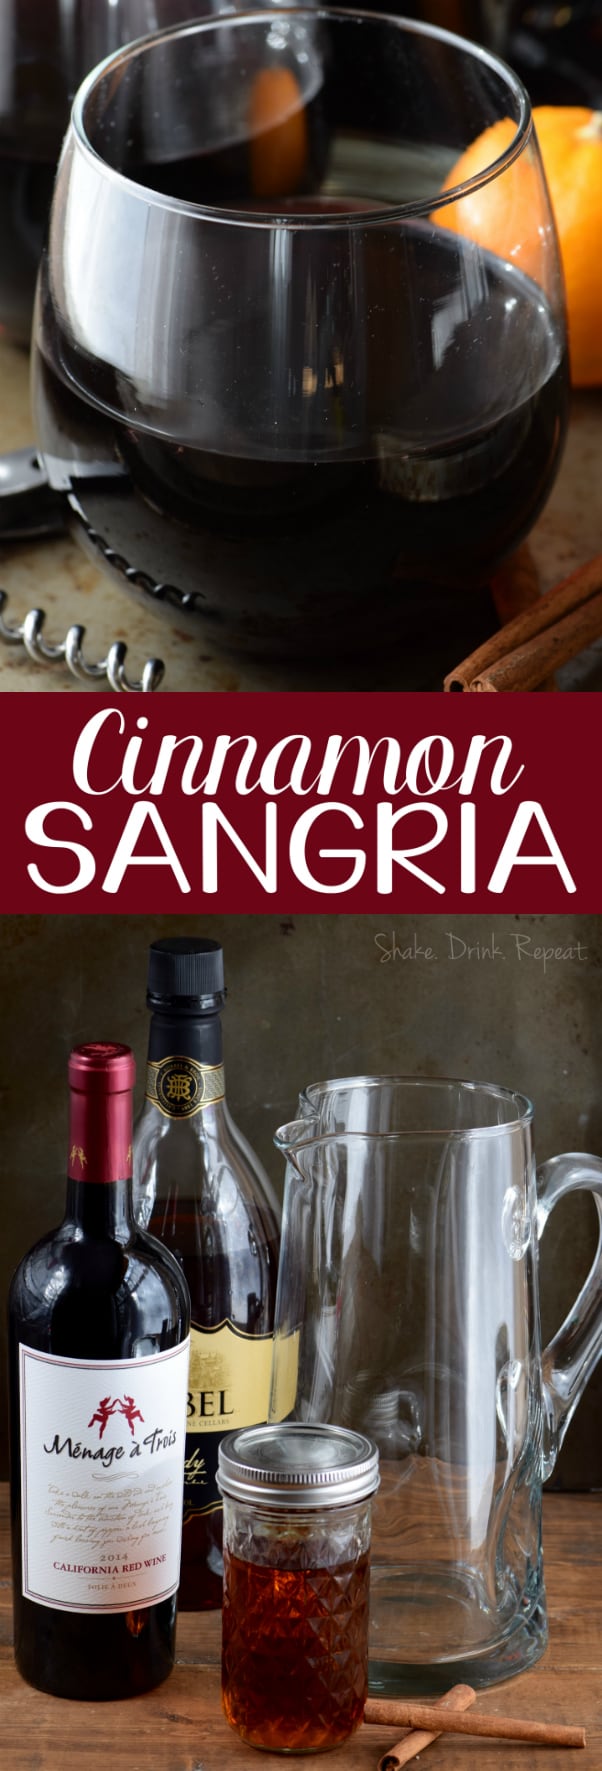 This Cinnamon Sangria is so simple to make, it will become your new favorite holiday drink!  Put your Fireball away, this sangria is made with red wine, brandy, and cinnamon sticks.